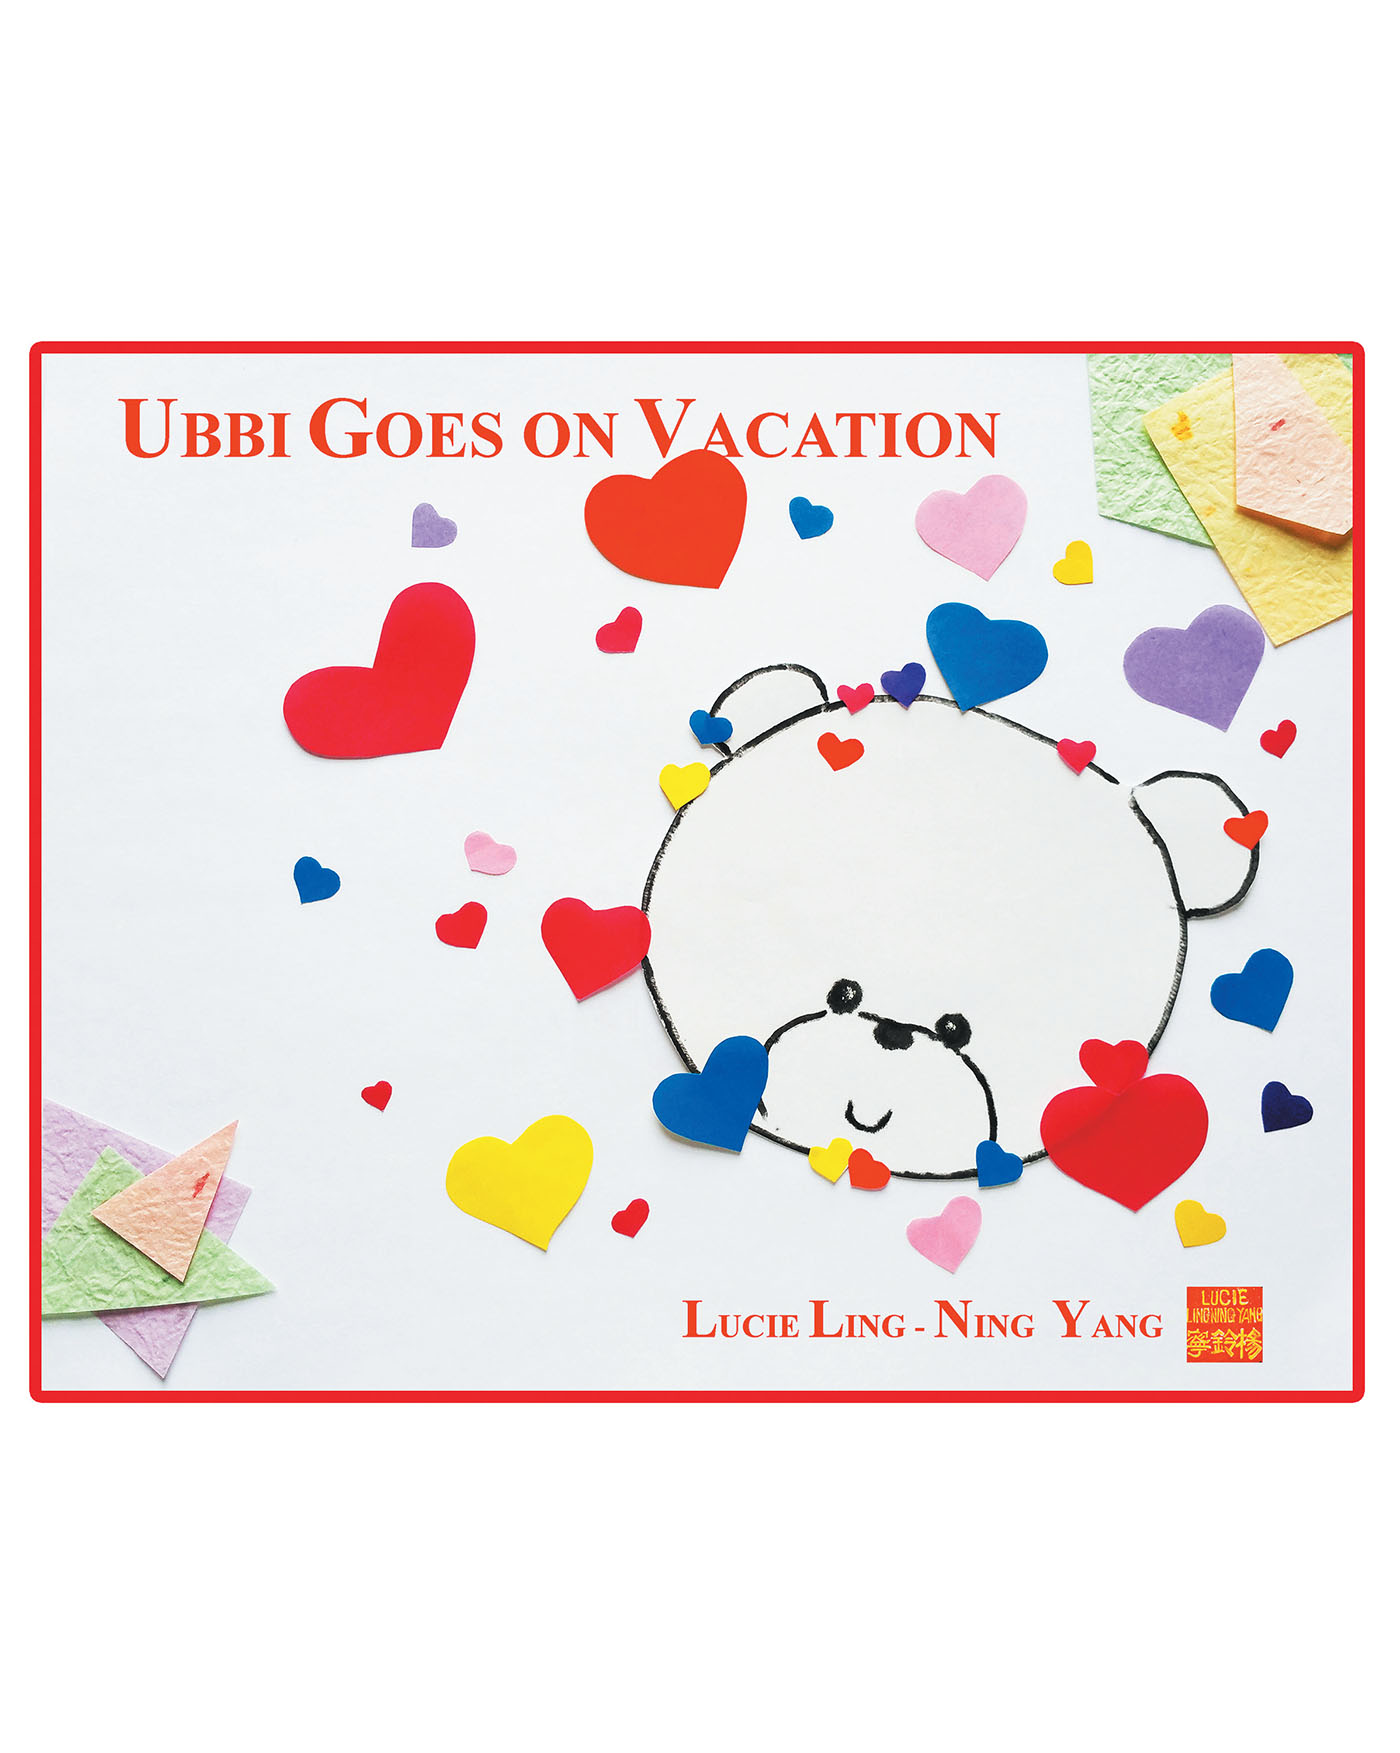 Lucie Ling-Ning Yang’s Newly Released "Ubbi Goes on Vacation" is a Charming Tale of a Special Bear’s Vacation That Offers a Fun Story with Helpful Travel Information